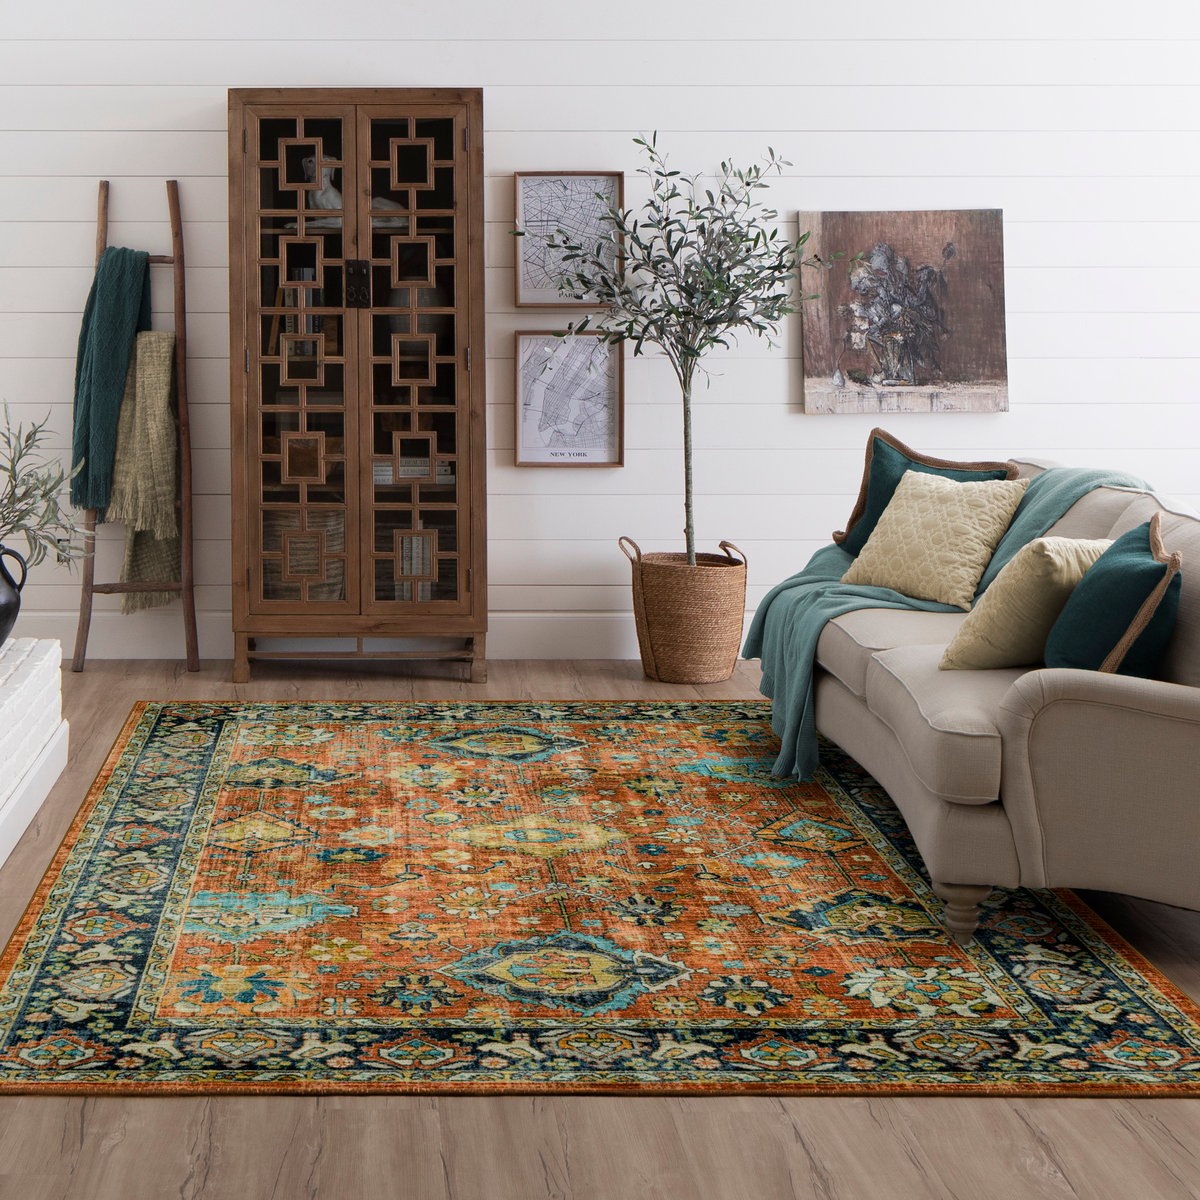 https://image1.rugs-direct.com/cdn-cgi/image/width=1200,height=1200/rug_gallery/00277/20775/148725/239040/ws_nerissa_red_zs008a400096120_style1.jpg